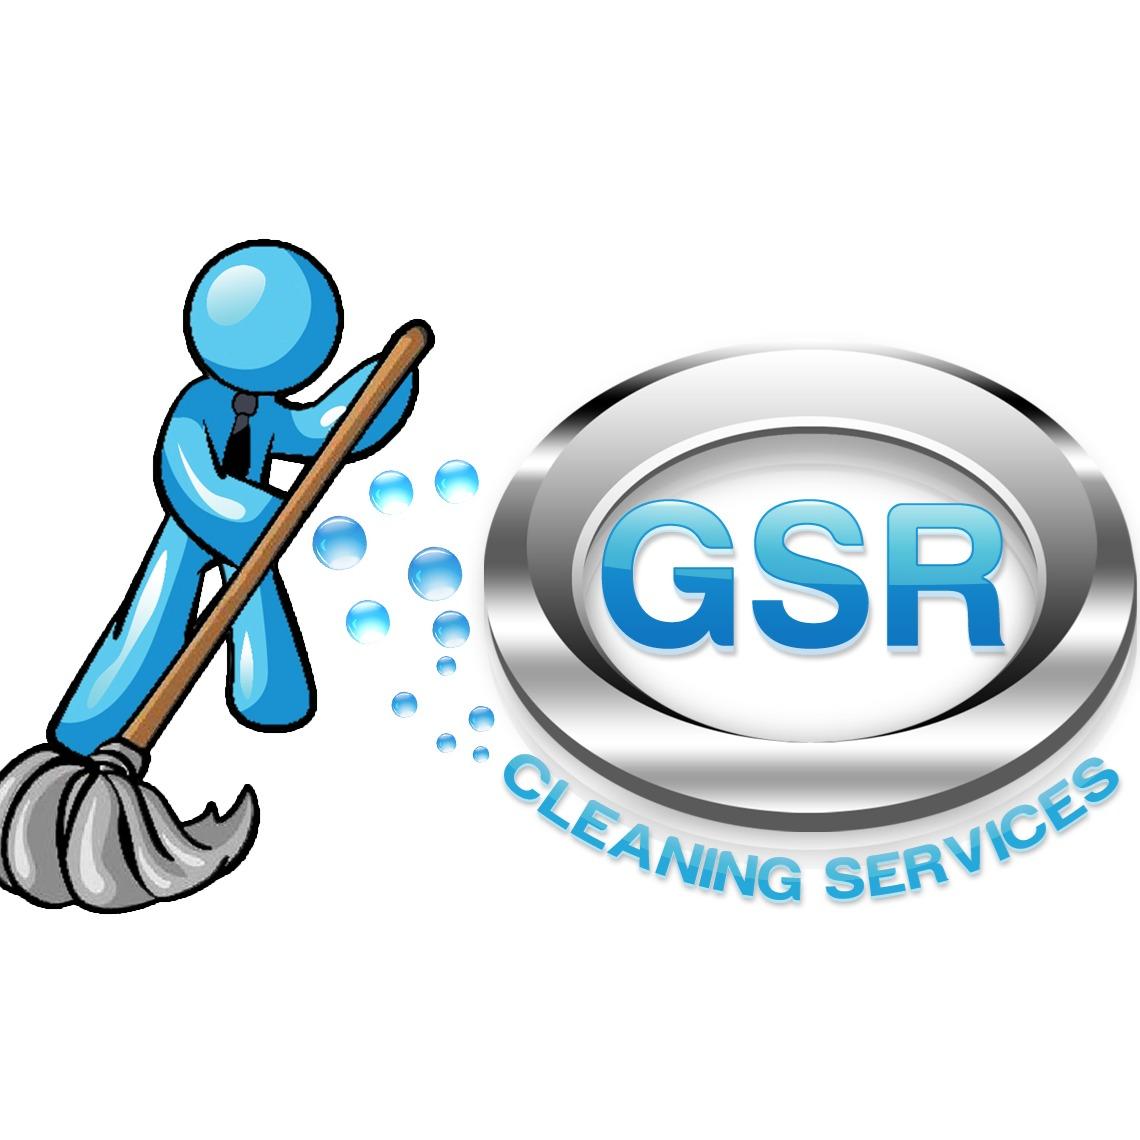 GSR Cleaning Services Melbourne GSR CLEANING SERVICES Melbourne (03) 9547 7477